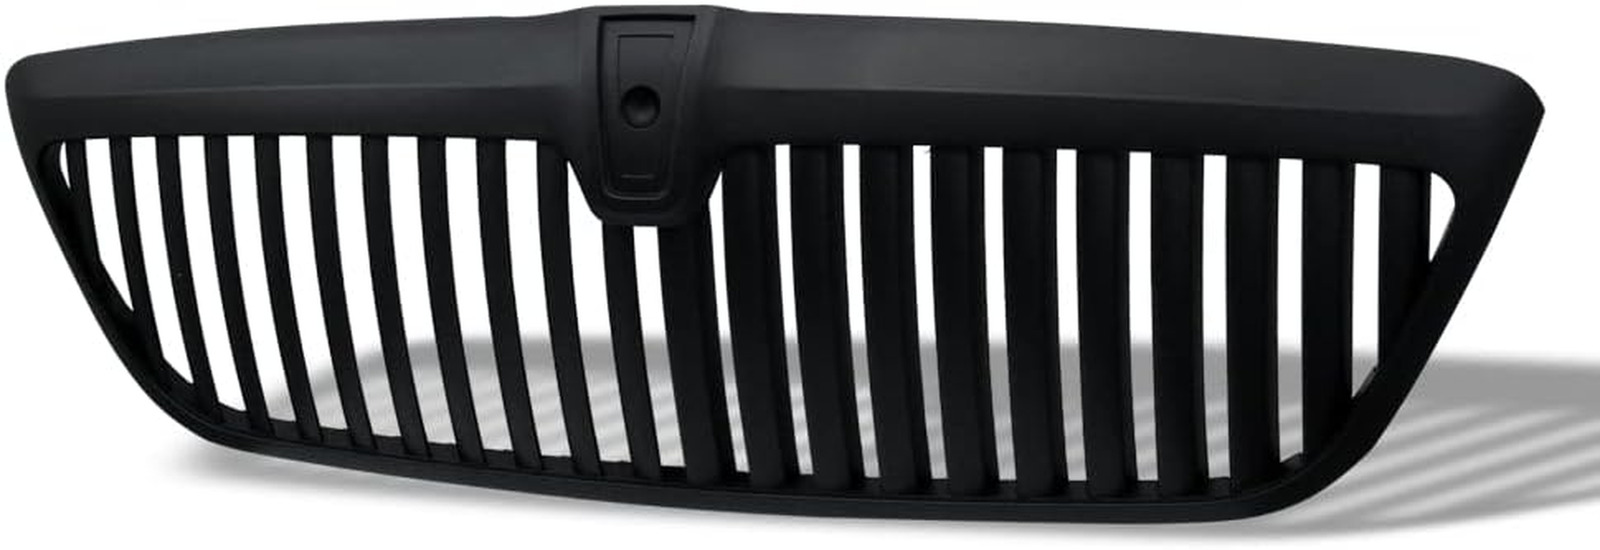 Black Vertical Front Hood Bumper Grill Grille ABS for 98-02 Lincoln Navigator